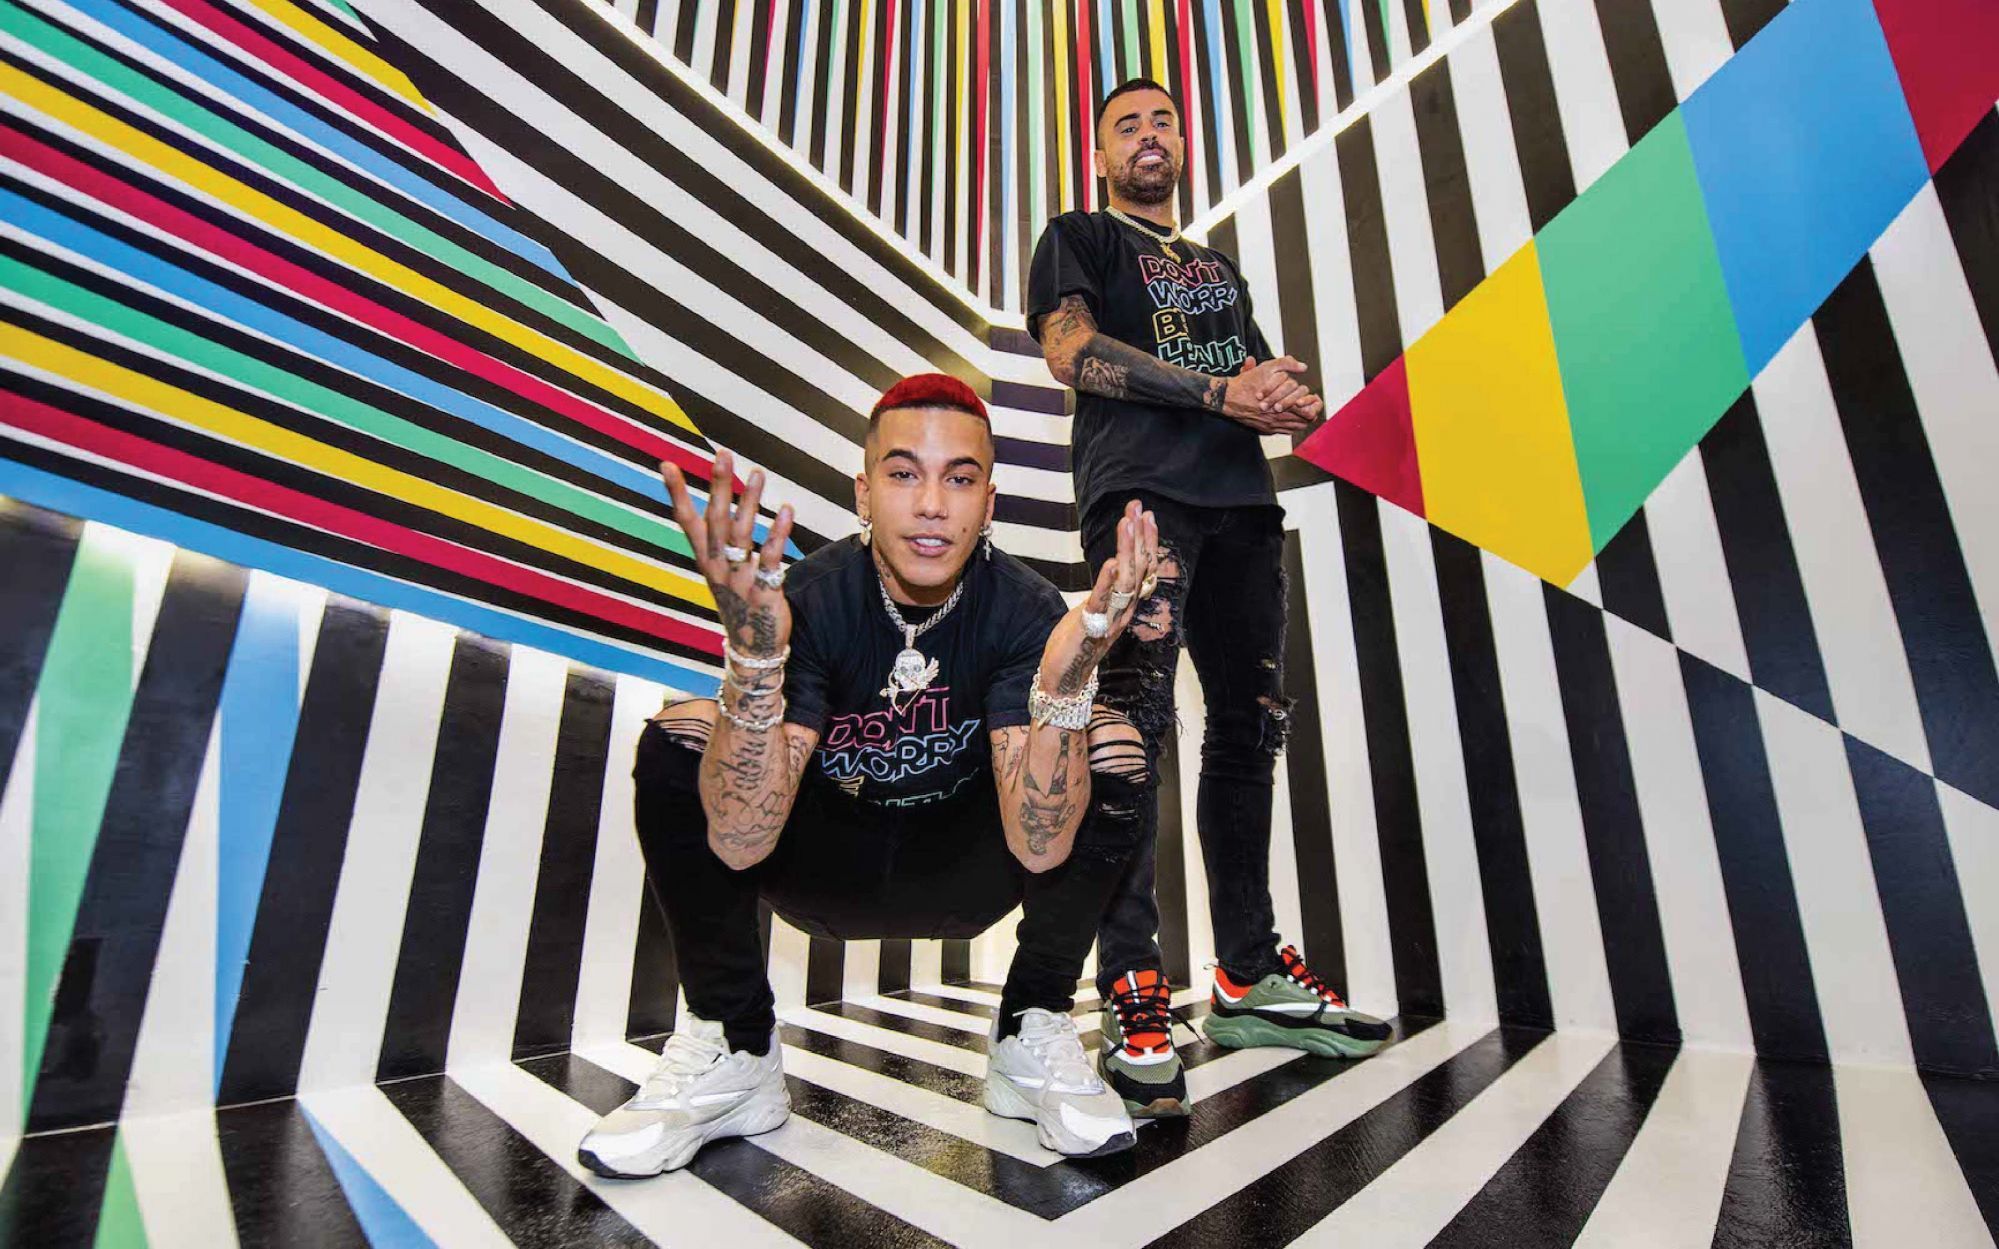 Petagna and Sfera Ebbasta are opening a new restaurant in Milan Healthy Color Milan is the new project of SPAL's striker and the X Factor judge